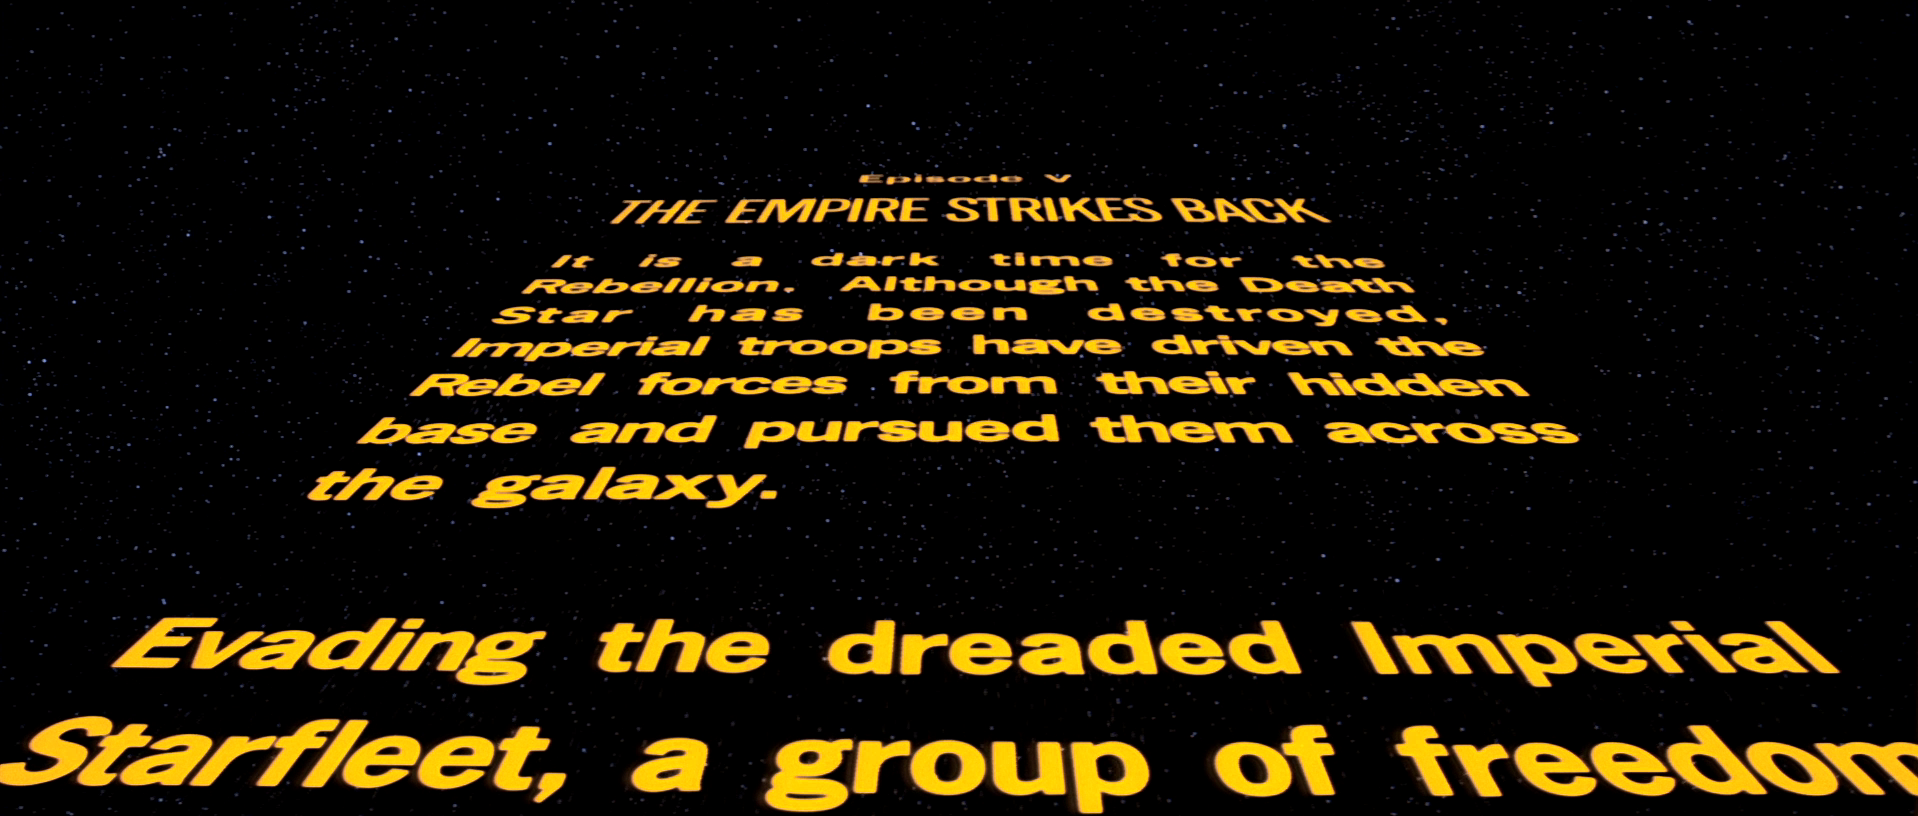 Star Wars opening crawl - CSS animation and transformation